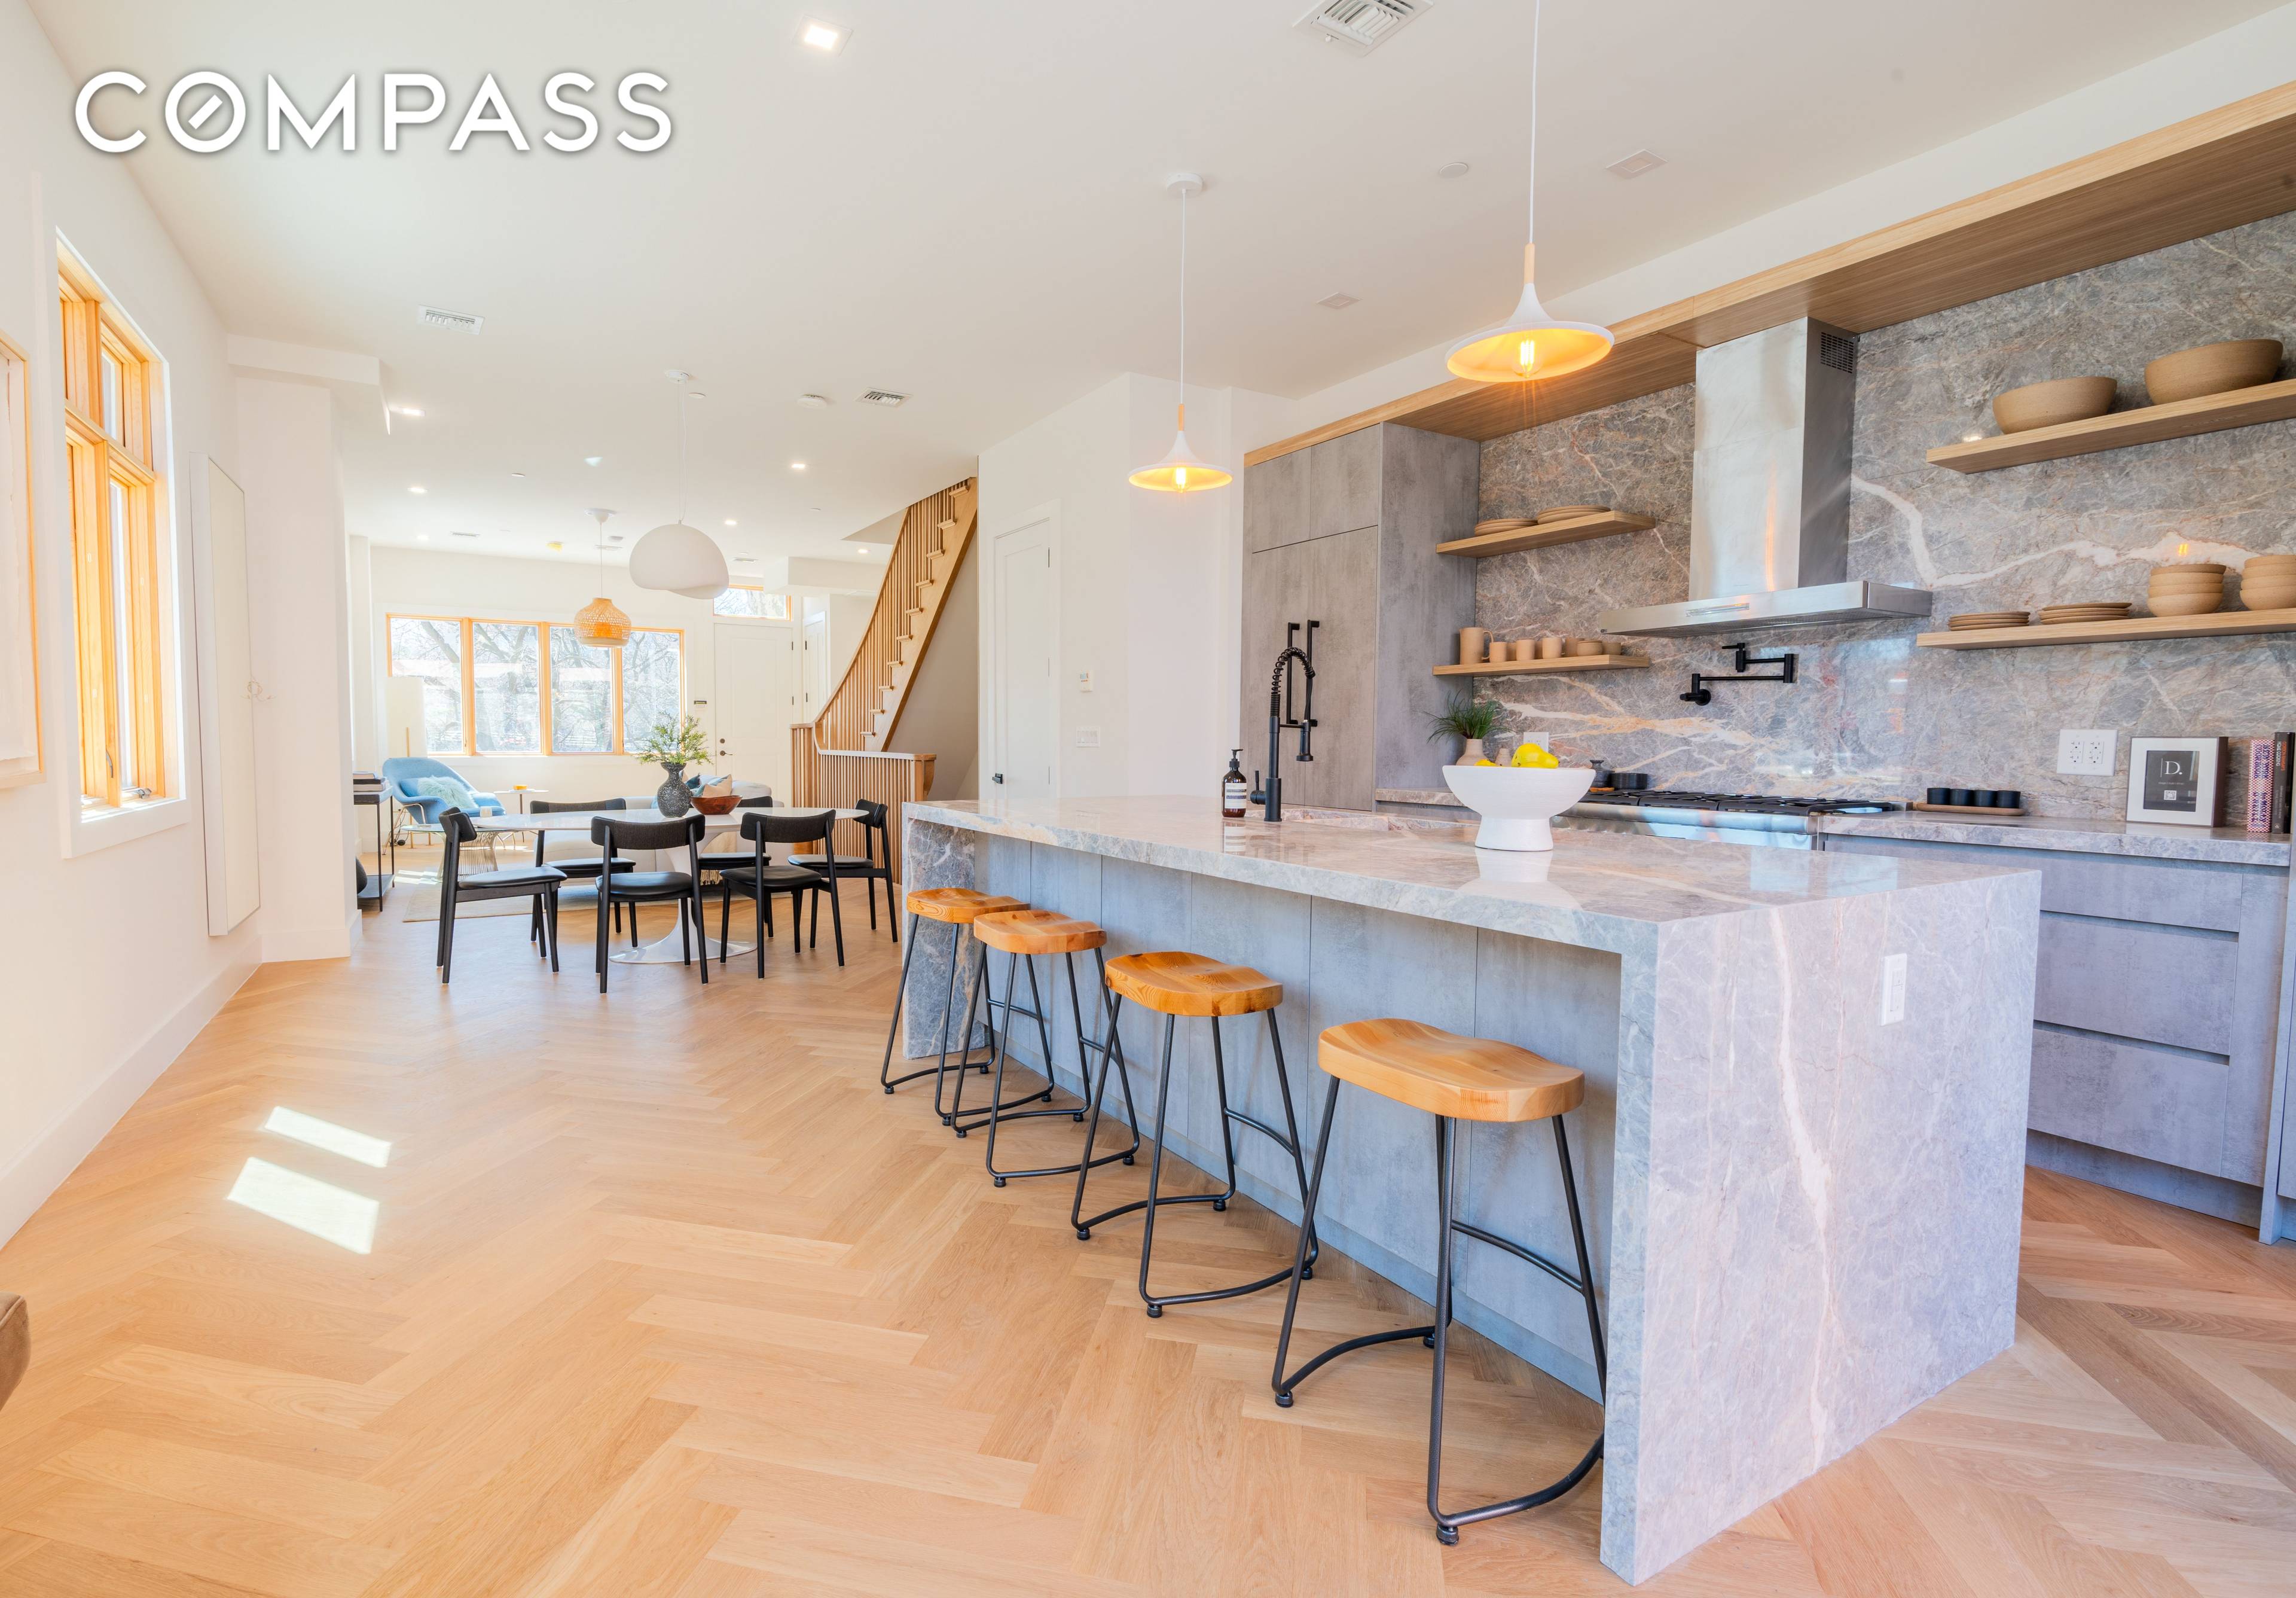 Welcome to this stunning, contemporary luxury townhouse located at 441 18th St, Brooklyn, NY.